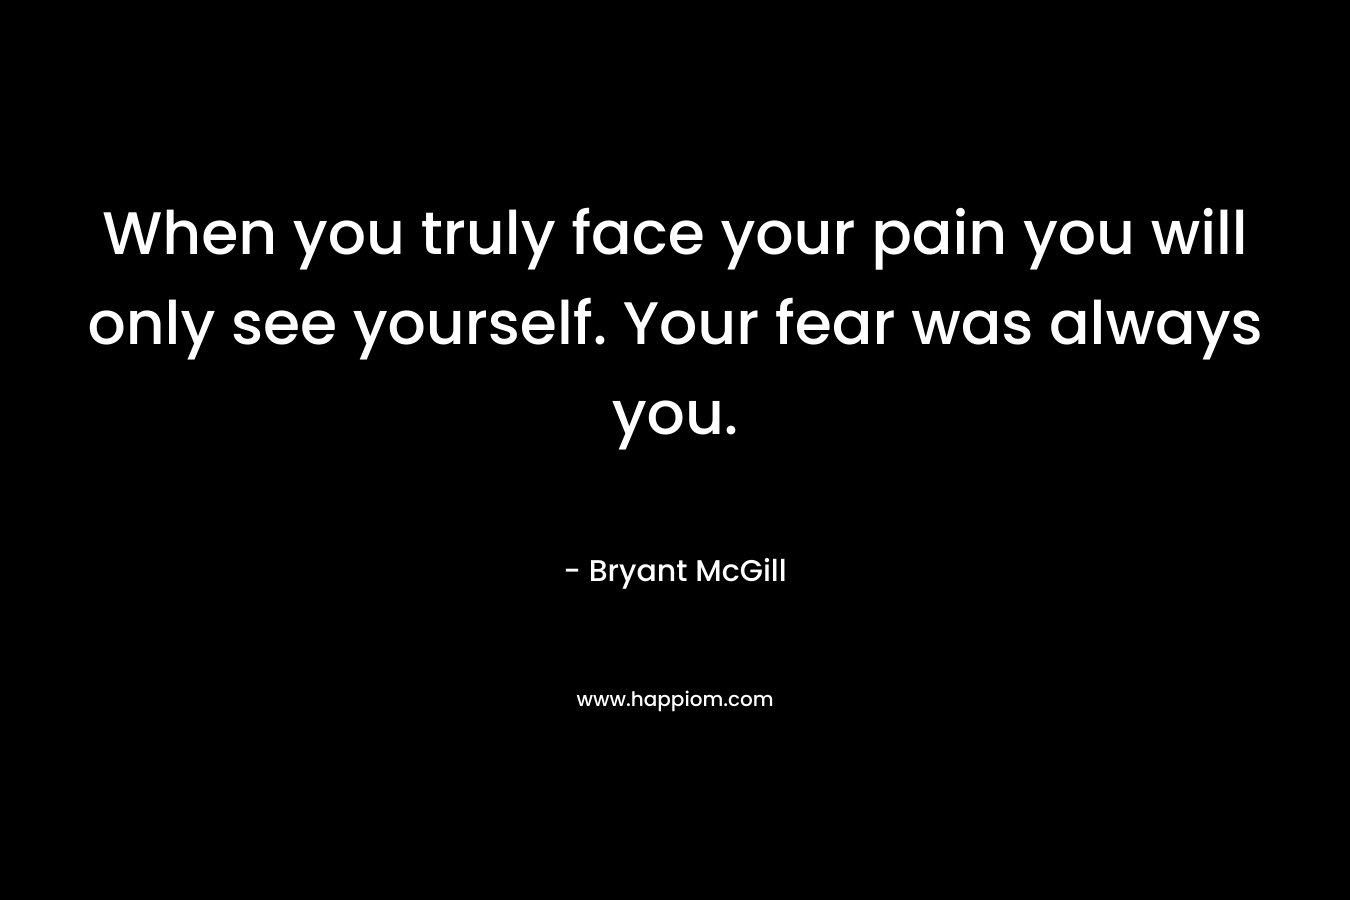 When you truly face your pain you will only see yourself. Your fear was always you.